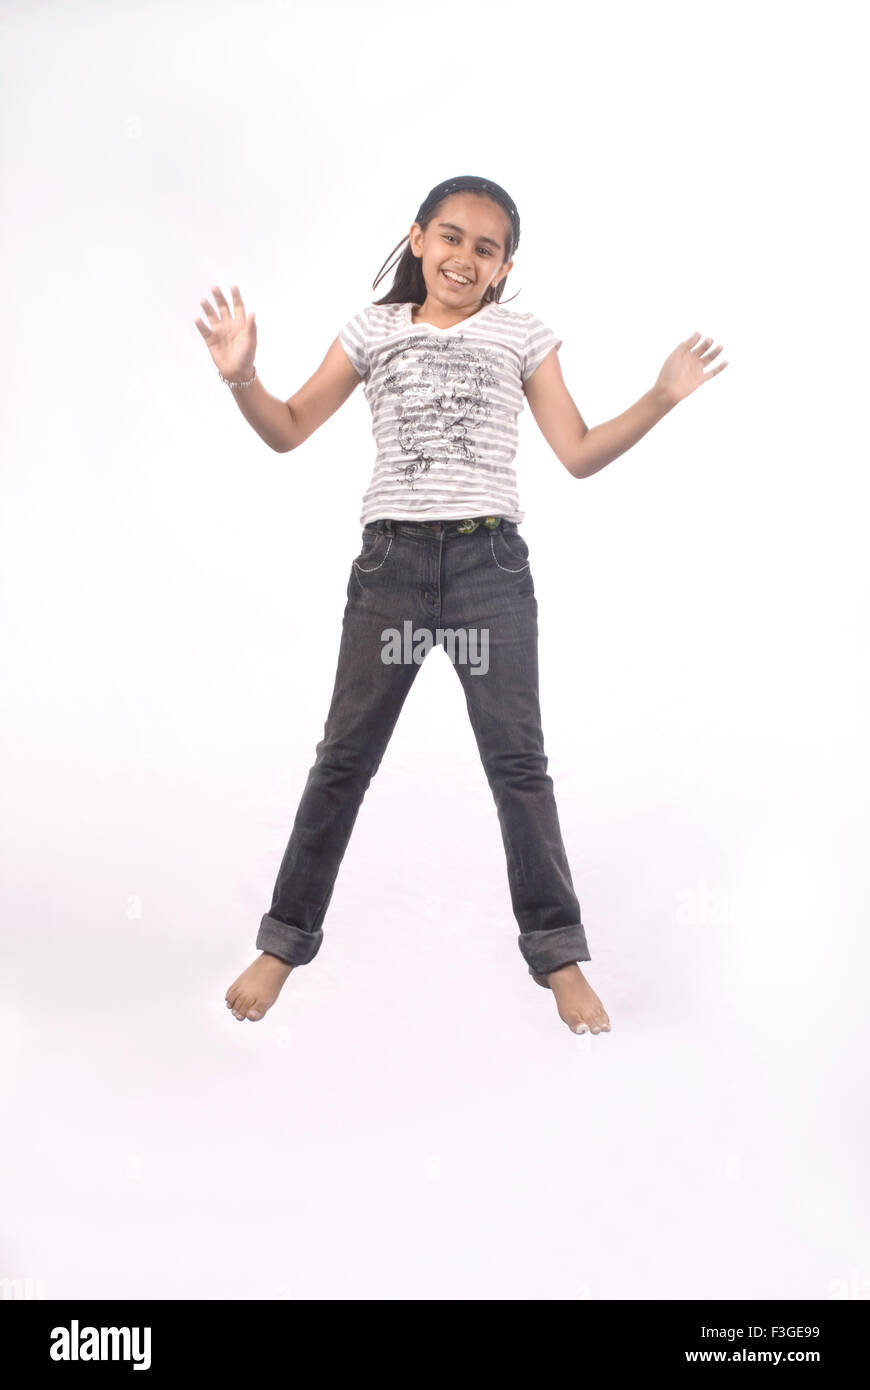 Young girl jumping in mid air MR#733 Stock Photo